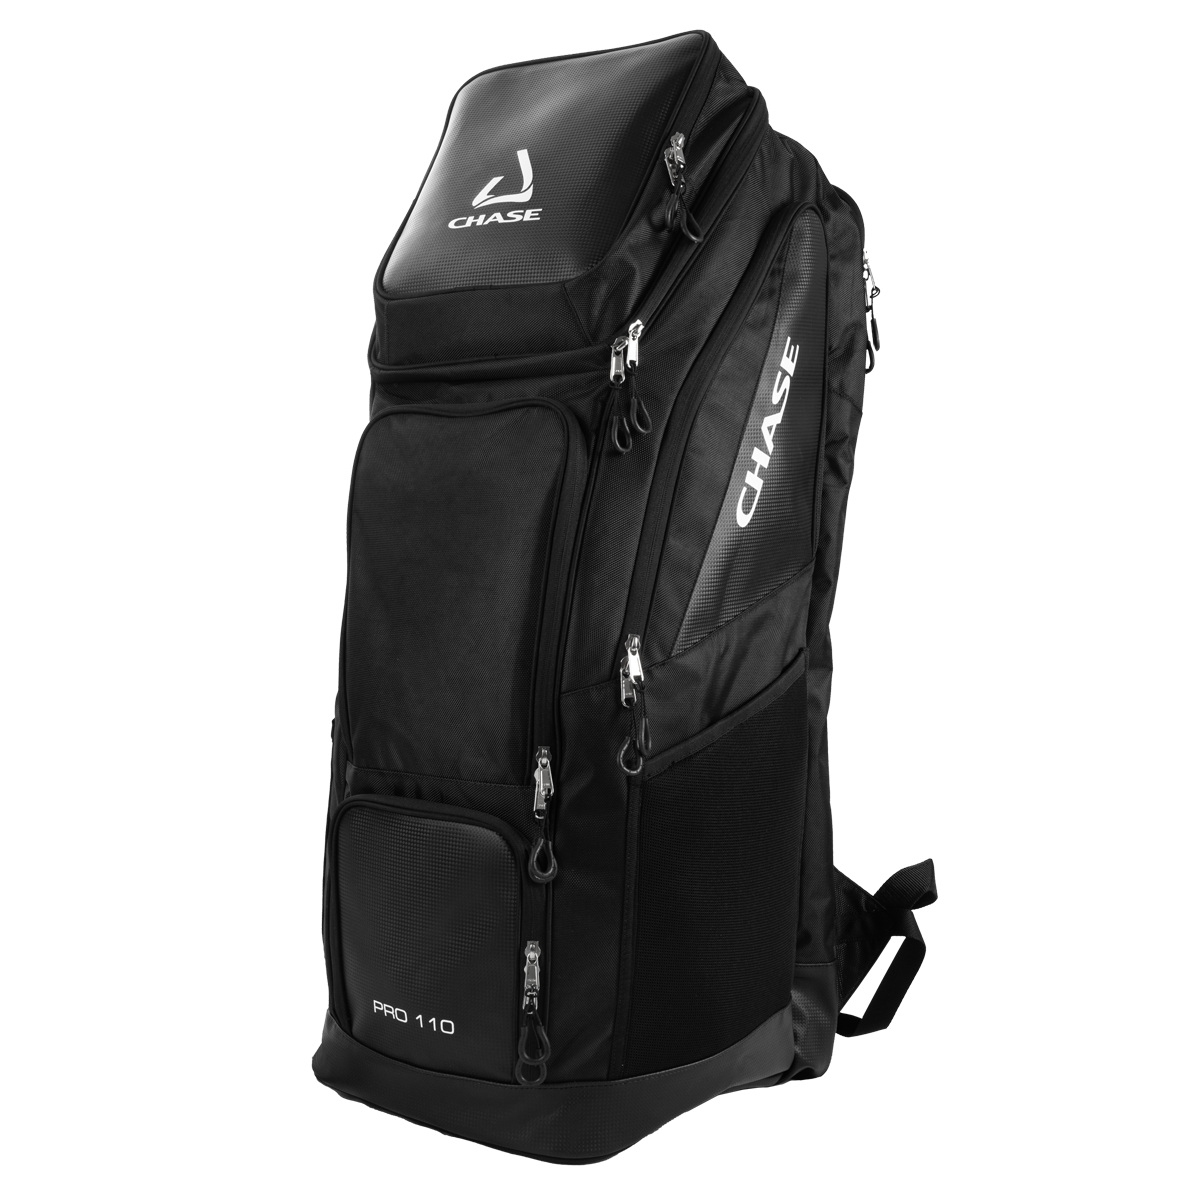 Chase Pro Duffle 110 - The Cricket Store